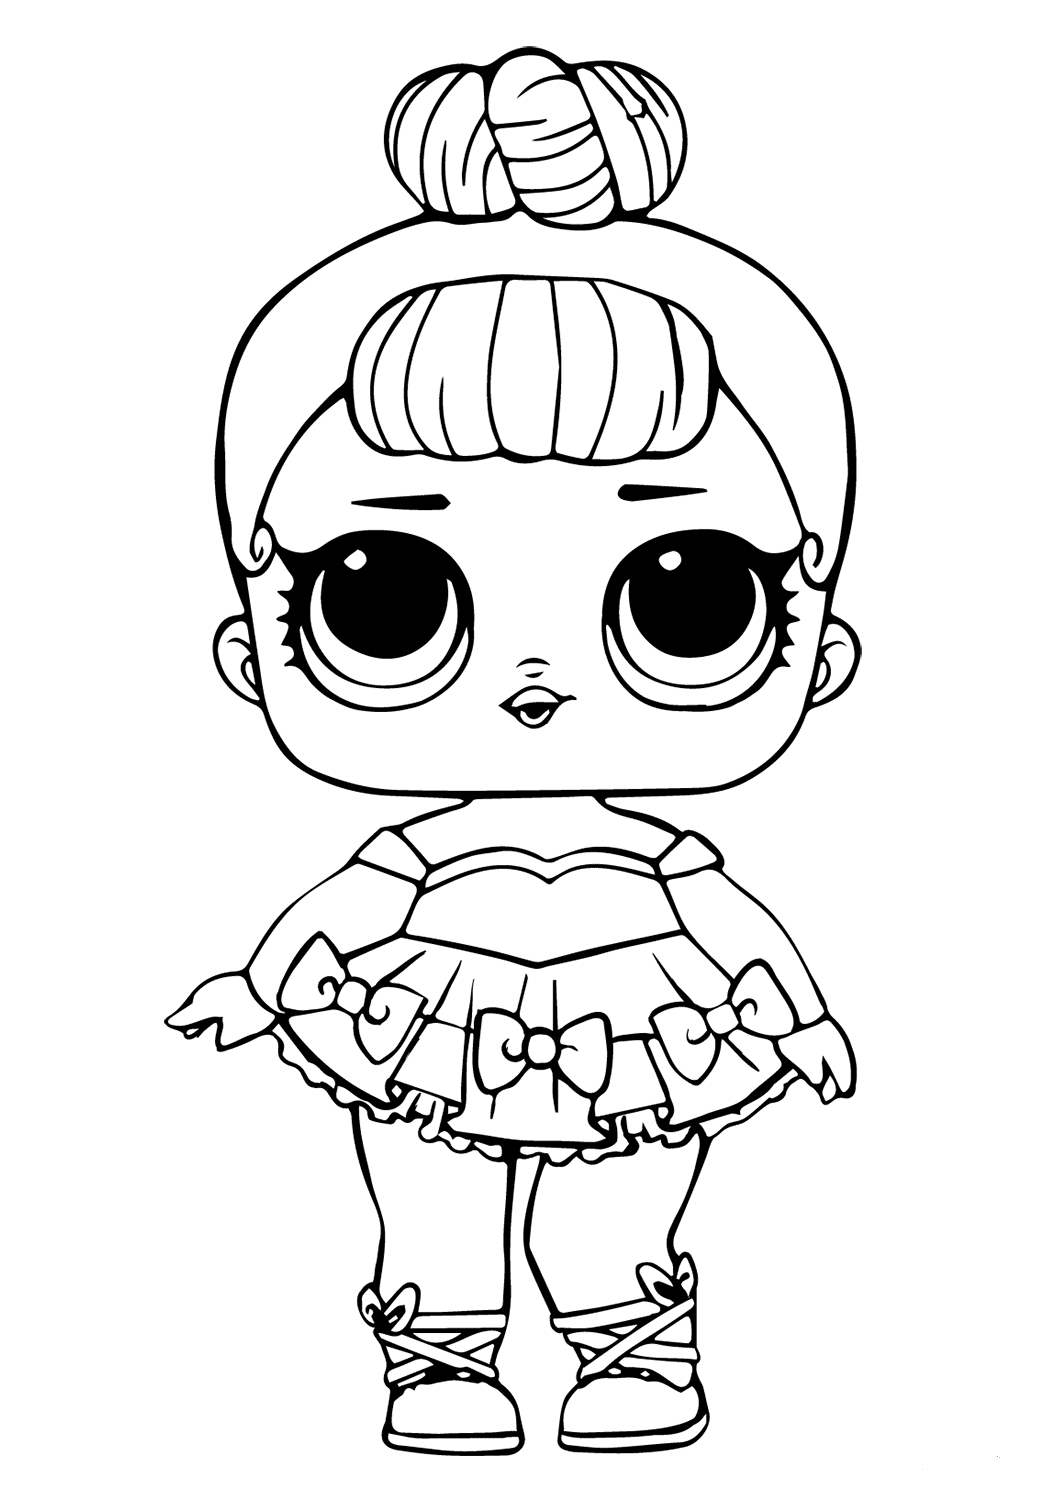 Lol Surprise Coloring Pages Miss Baby - Miss Baby Coloring Page Lotta LOL | Sereias para colorir ... - Well, she's all dressed up and ready to be colored for the lol surprise beauty pageant!click to expand 🔎👪 pa.